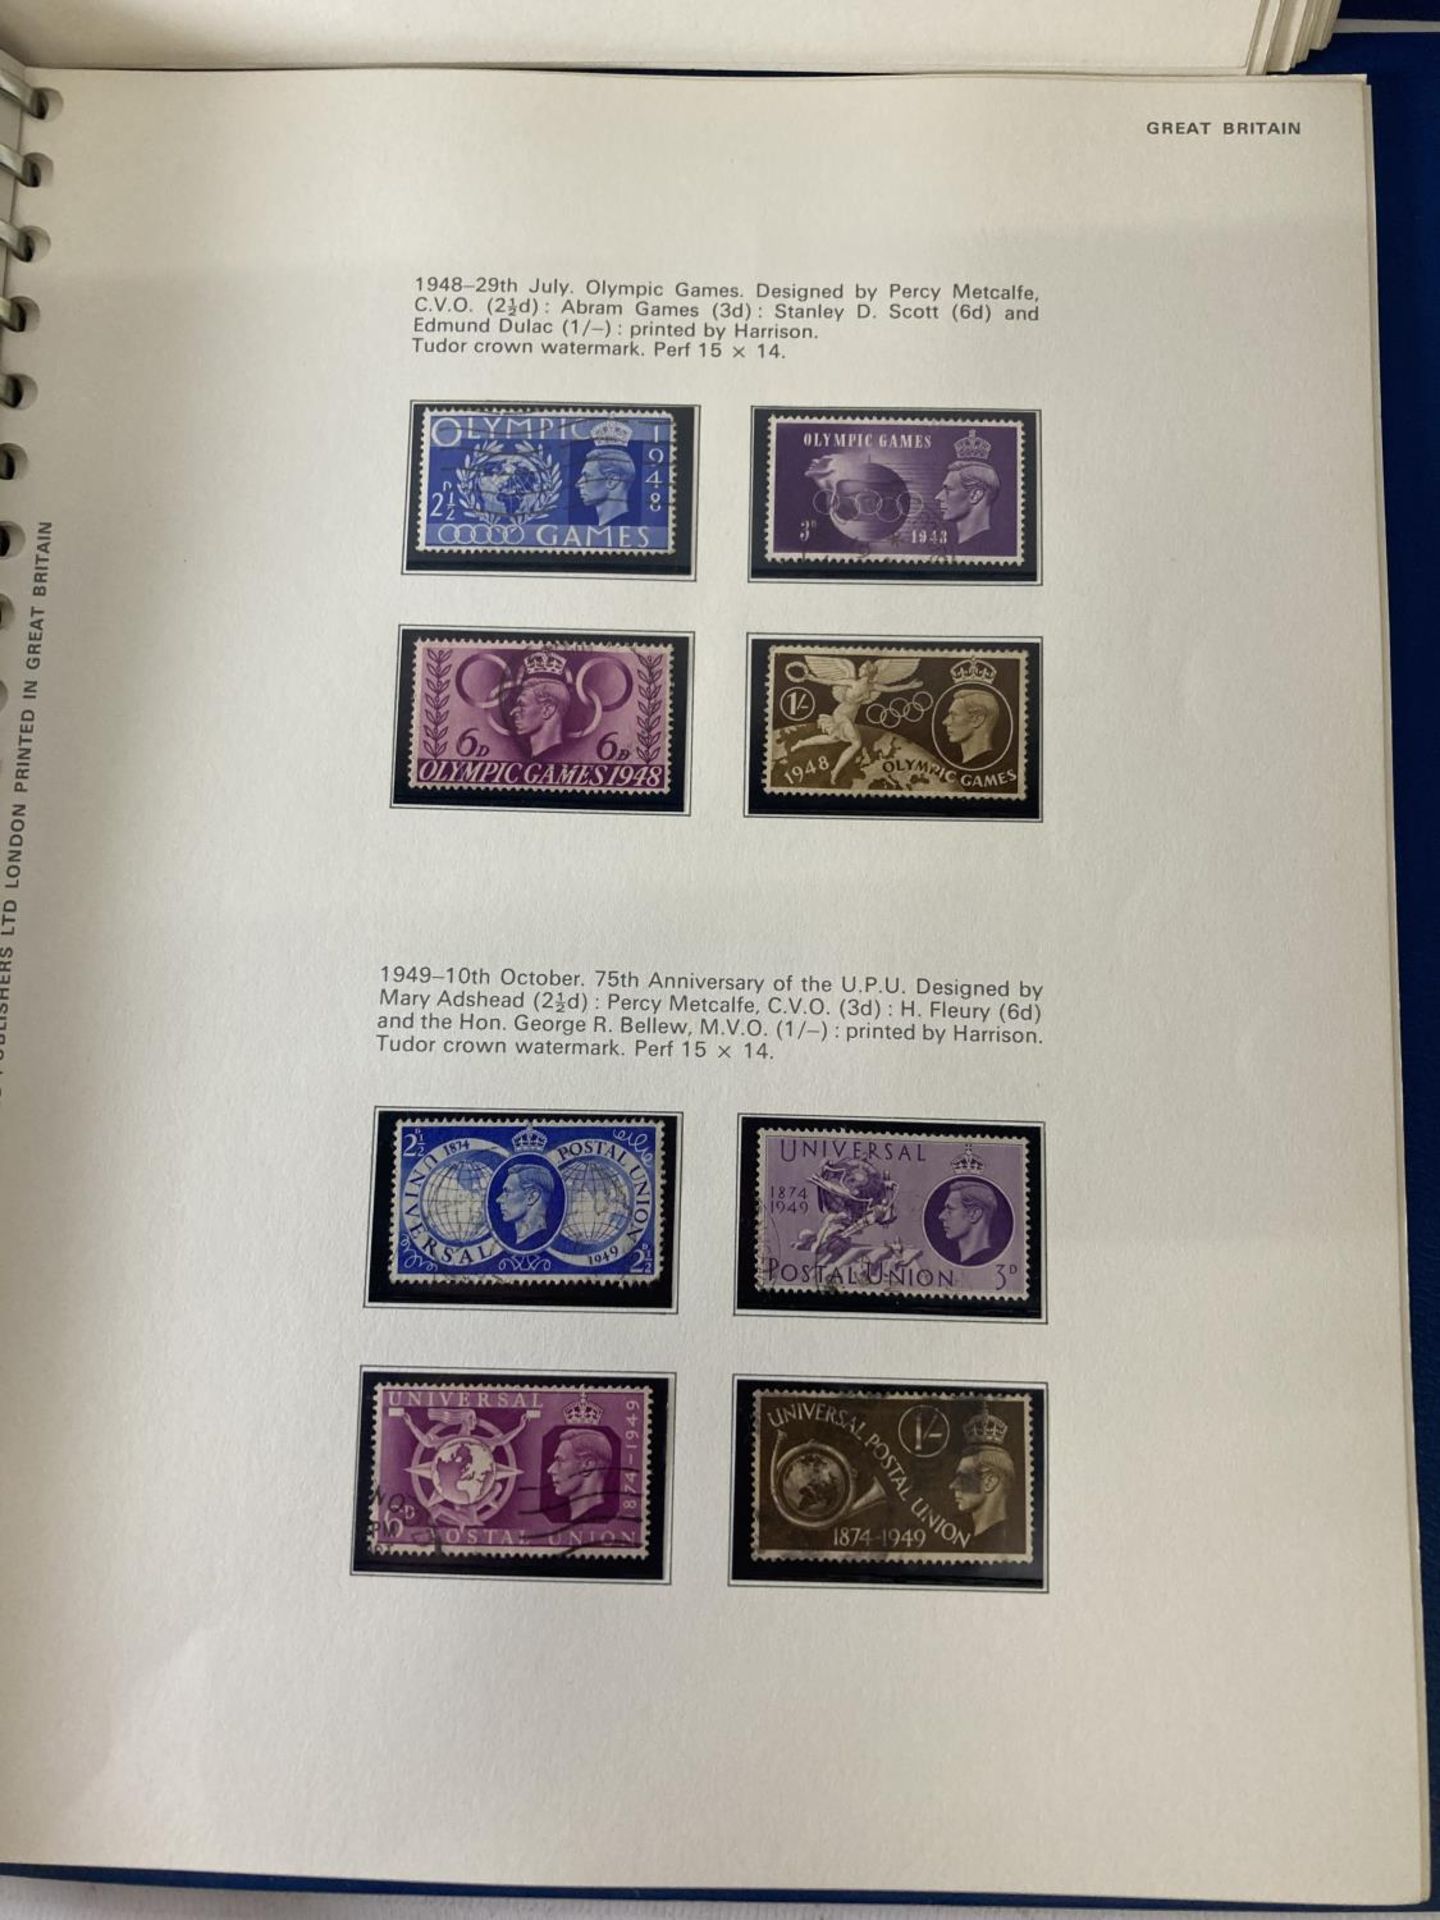 TWO BLUE STAMP ALBUMS CONTAINING STAMPS OF GREAT BRITAIN 1840 TO 1951 AND 1952 TO 1971 - Image 2 of 7